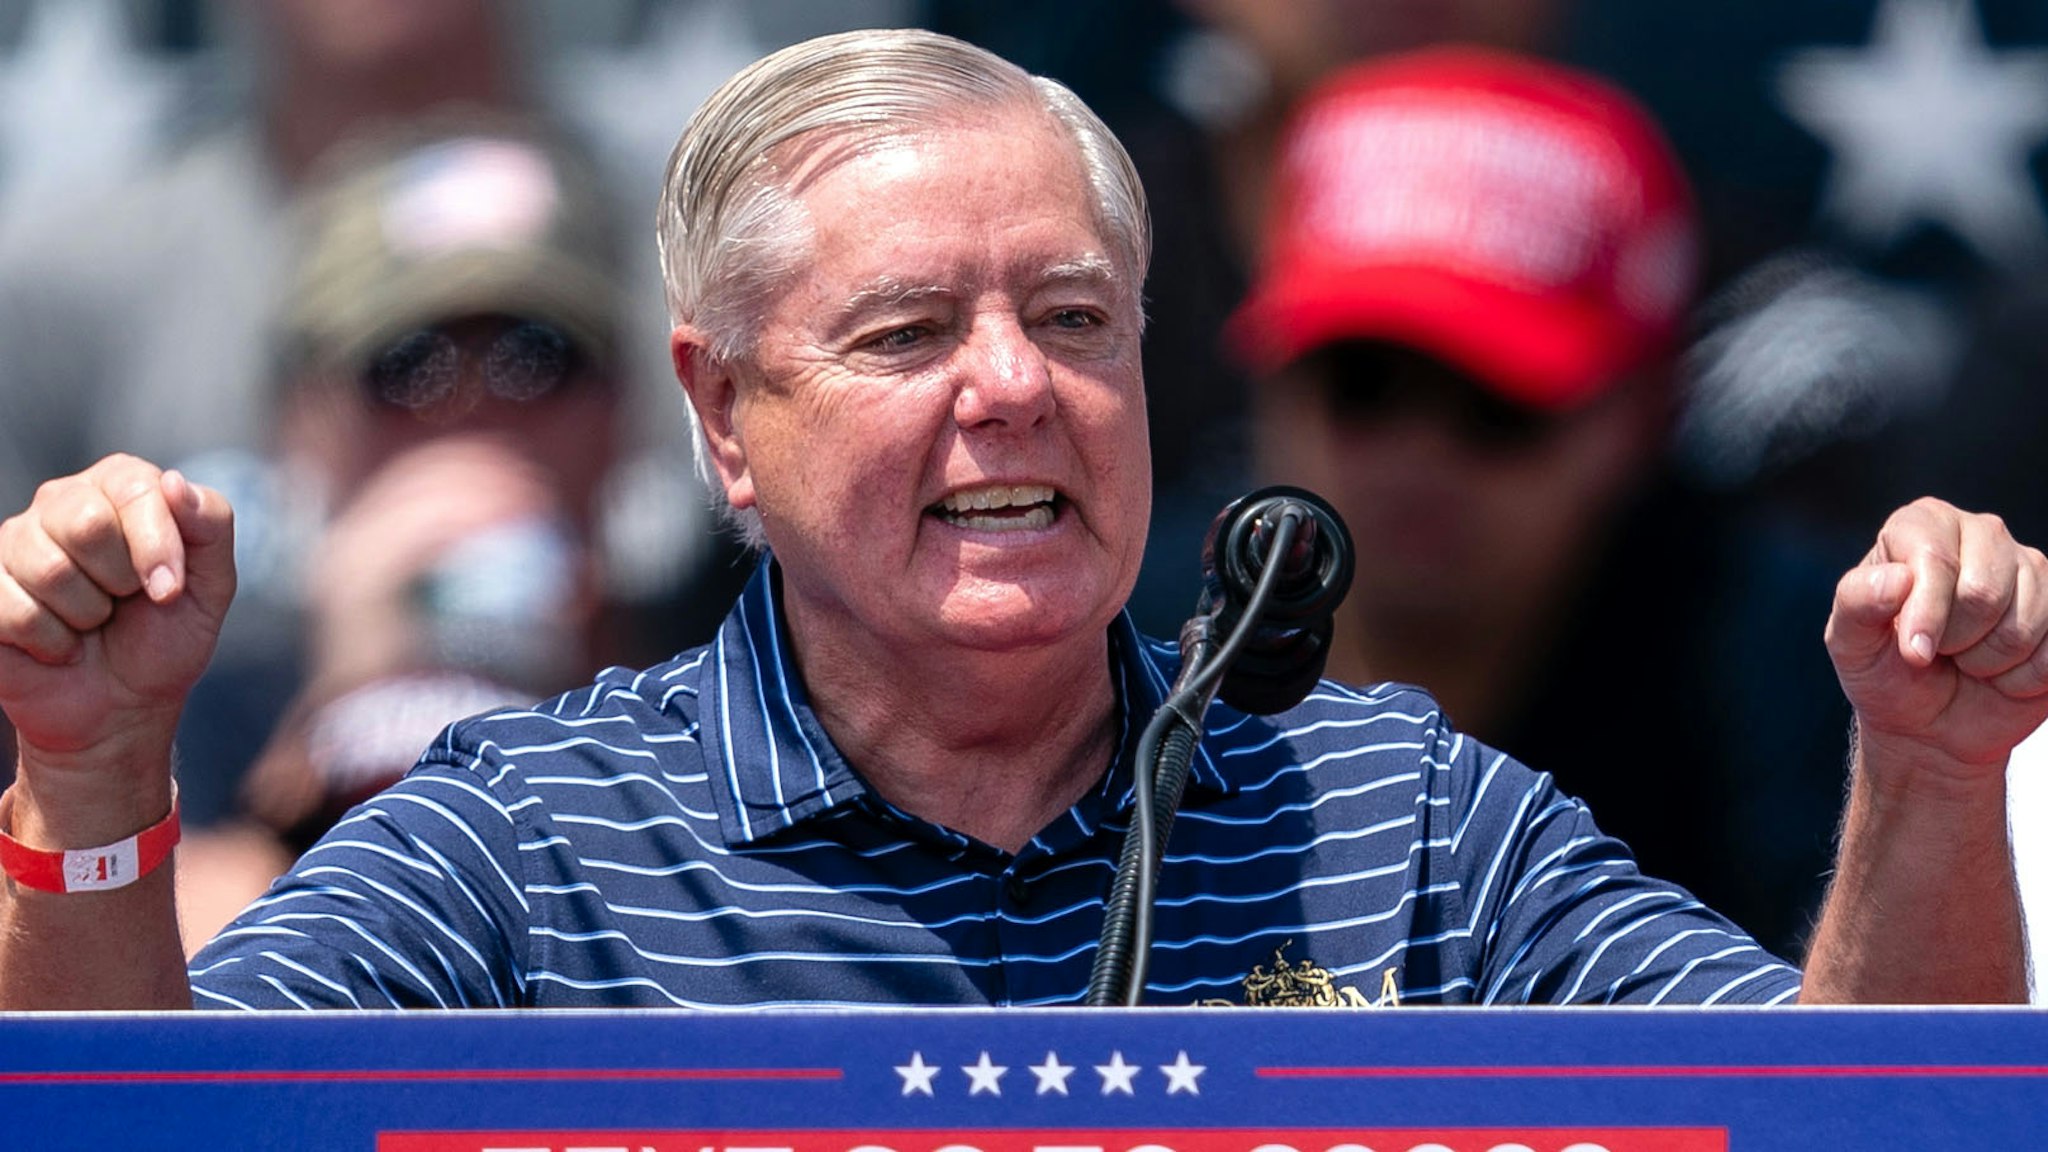 Senator Lindsey Graham, a Republican from South Carolina, speaks during a campaign event for former US President Donald Trump in Pickens, South Carolina, US, on Saturday, July 1, 2023. Former US President Trump praised Supreme Court rulings that ended affirmative action in college admissions and a student debt-relief program, as well as limited LGBTQ protections, touting his role in installing the court's conservative majority.